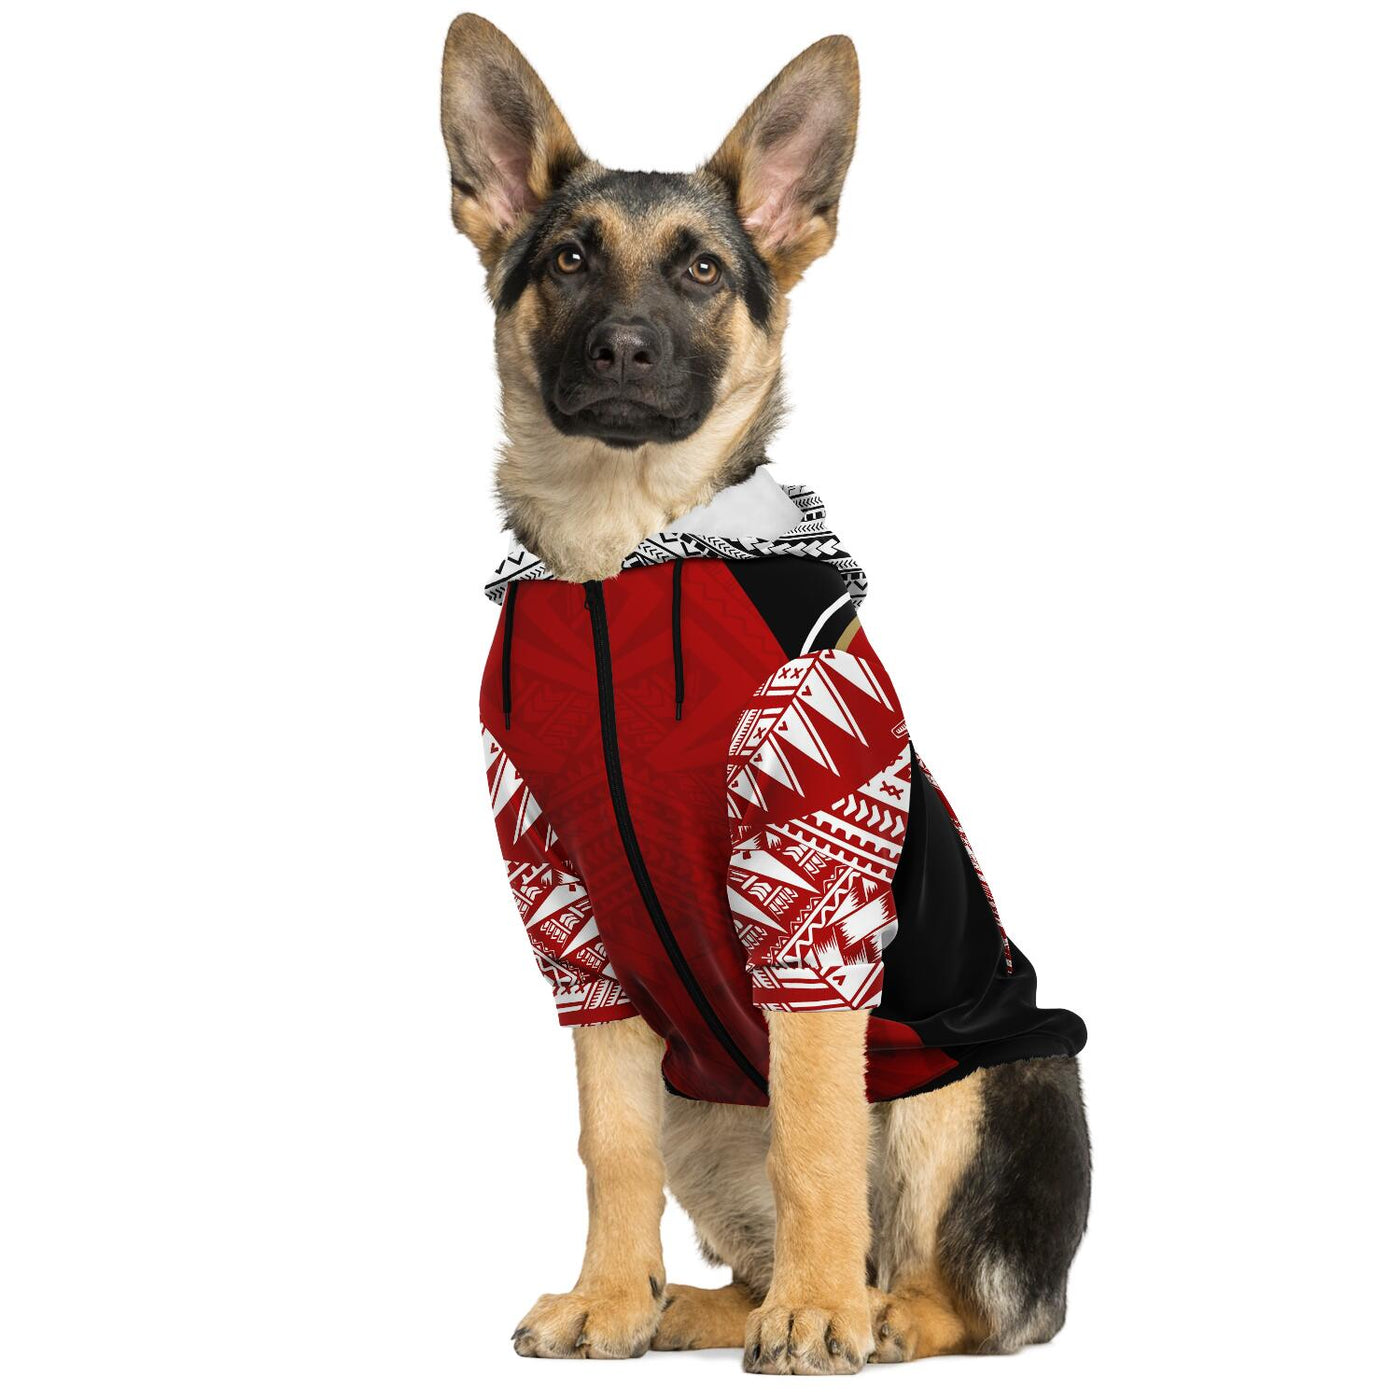 49ers dog outfit